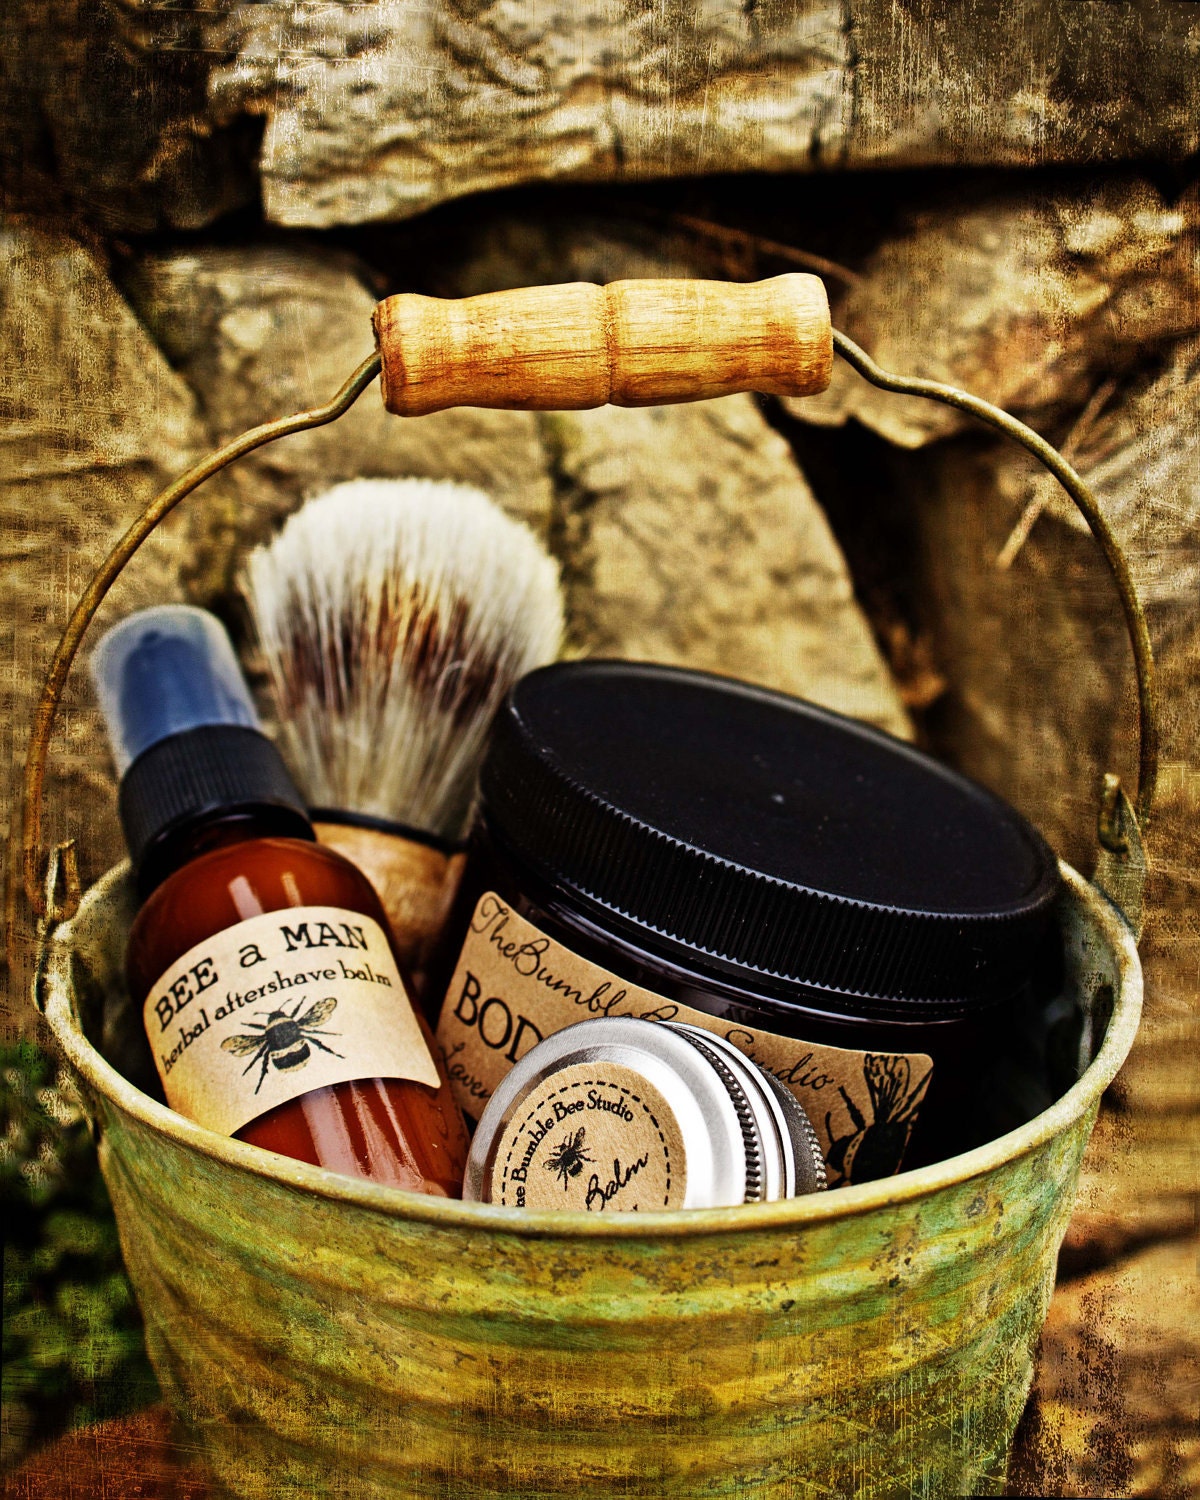 BEE a MAN Essentials Grooming Kit - as featured on the front page of etsy